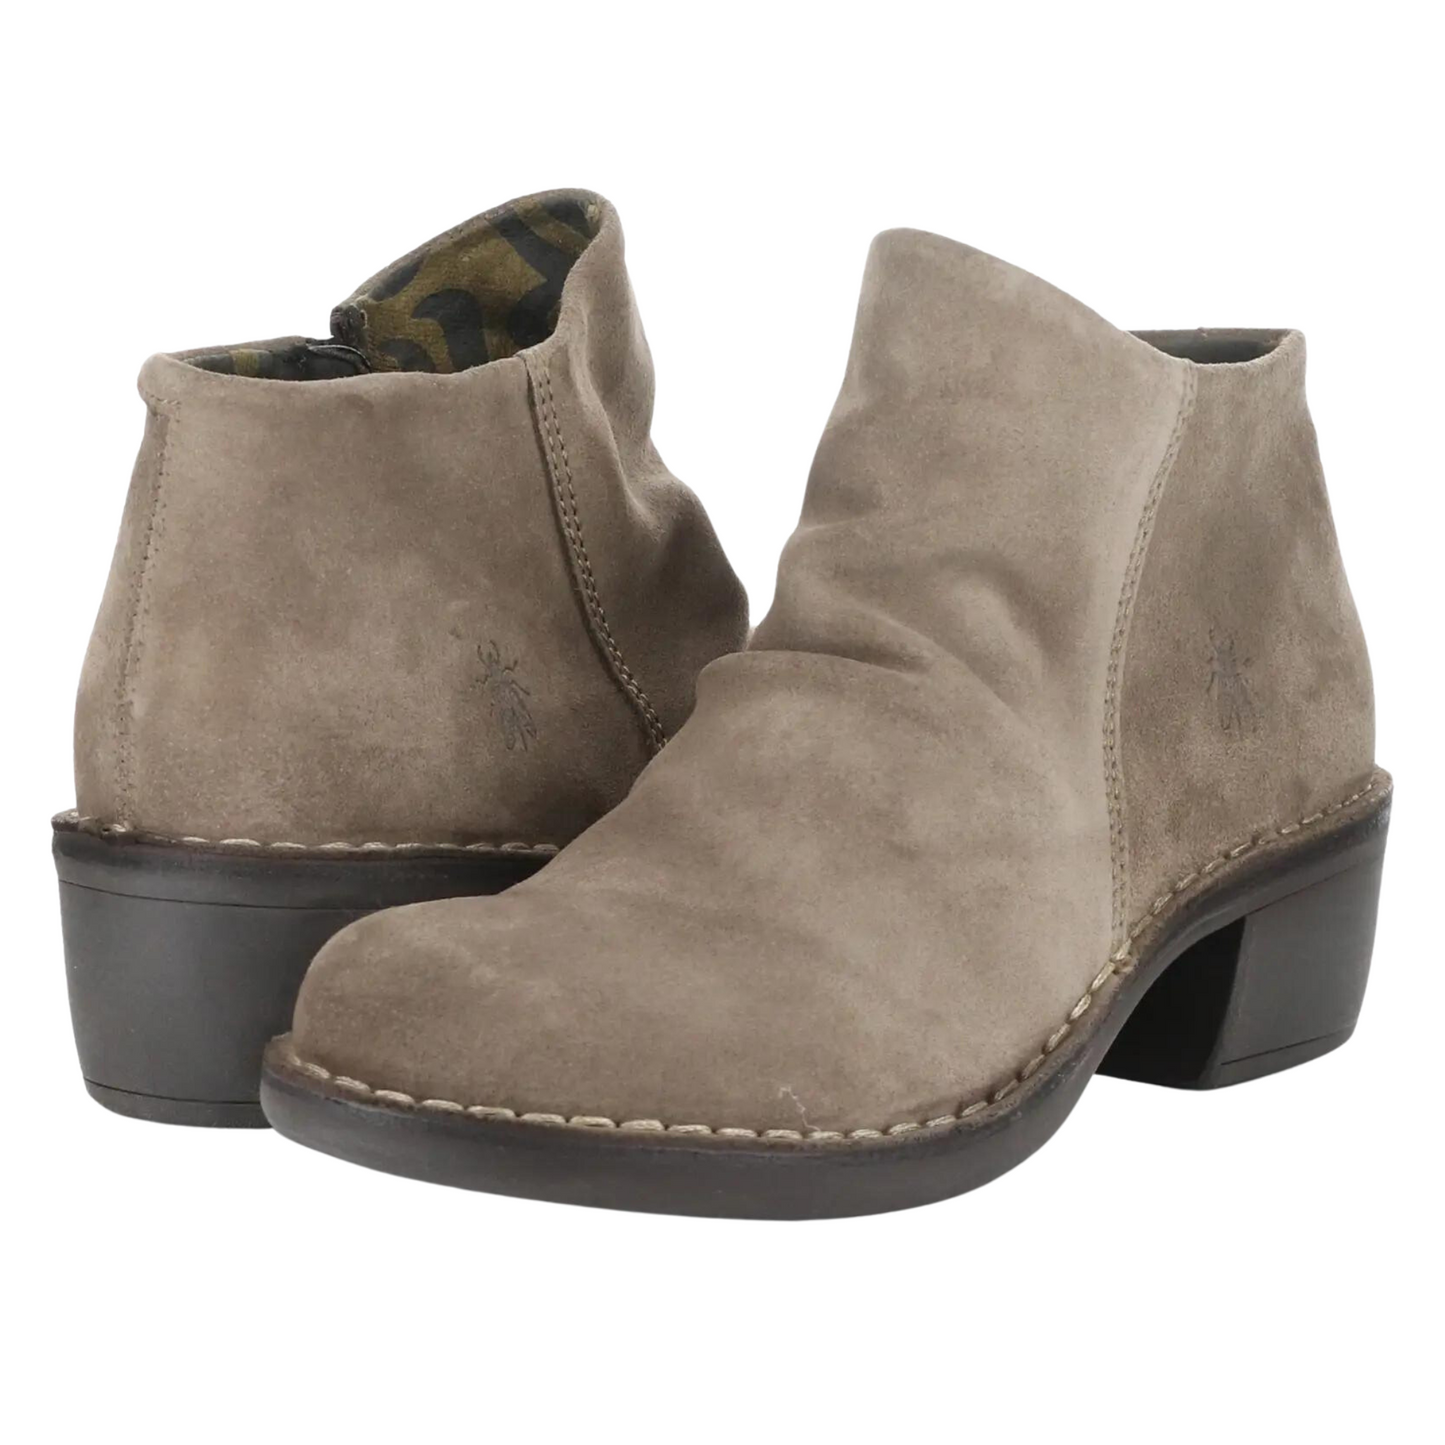 Front and rear profiles of a pair of Fly London Merk Boots in the colour Taupe.